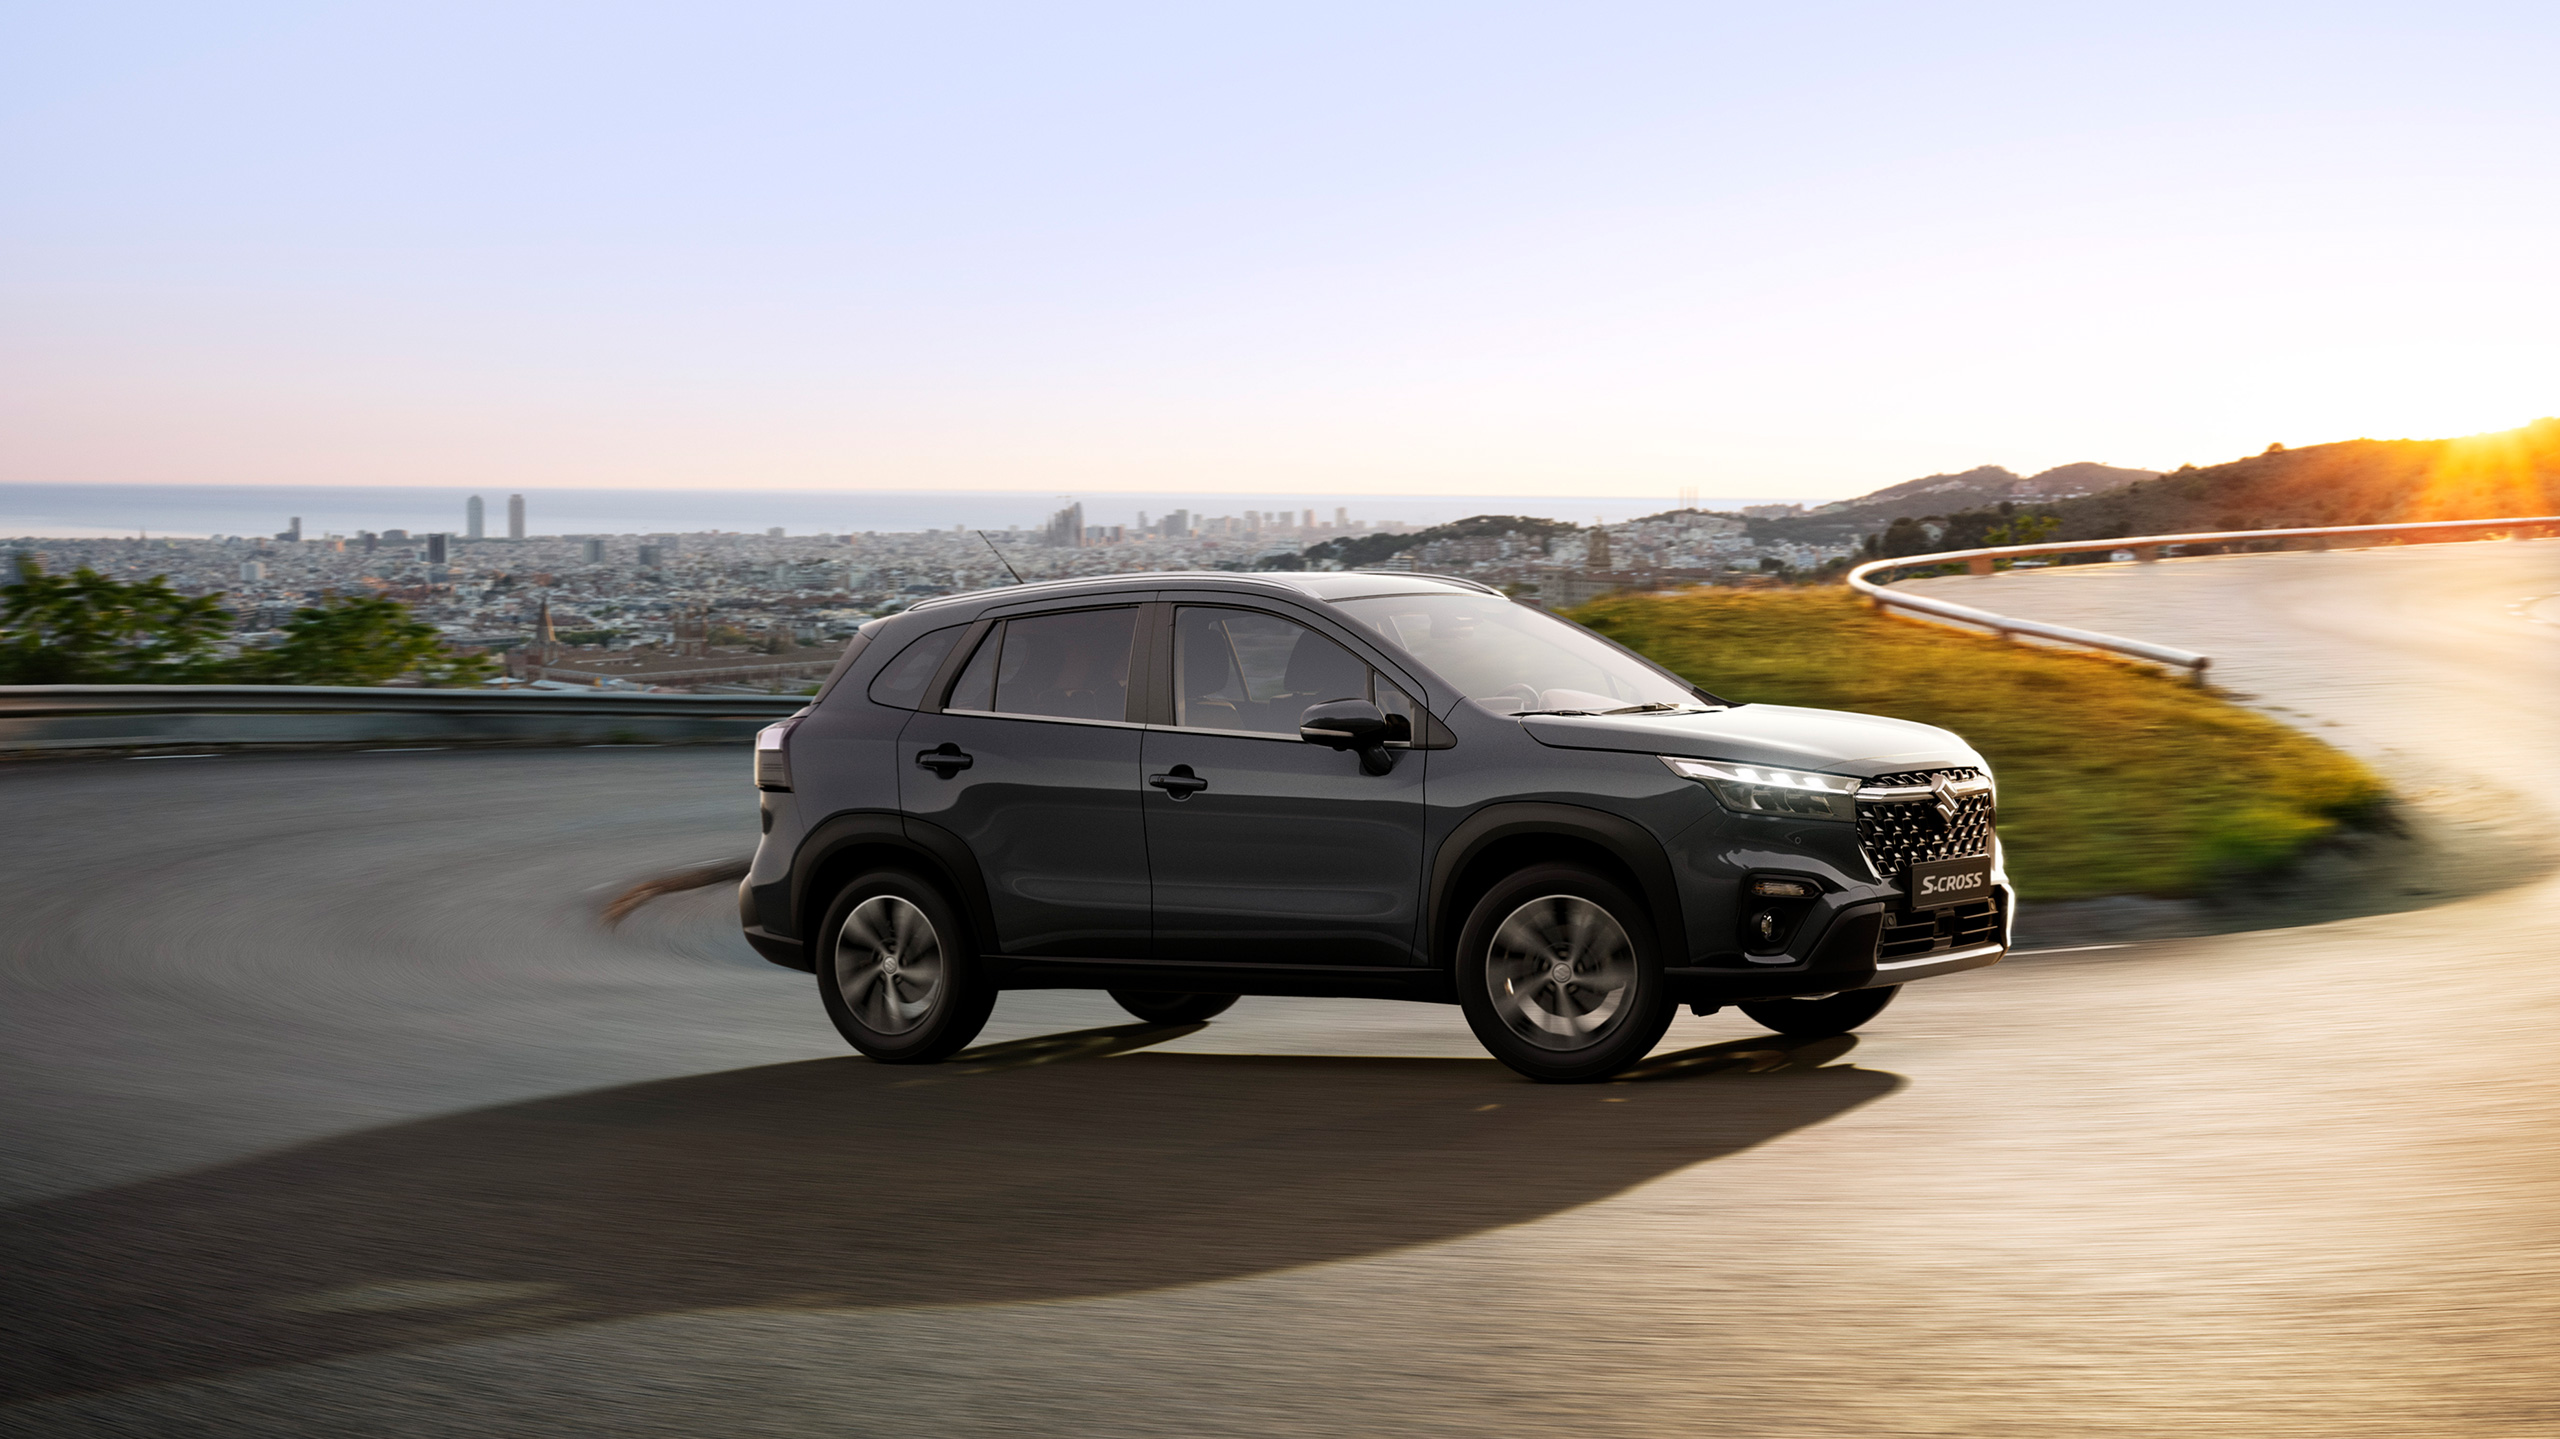 image_from_world_premiere_of_the_all-new_S-CROSS_side_winding_road